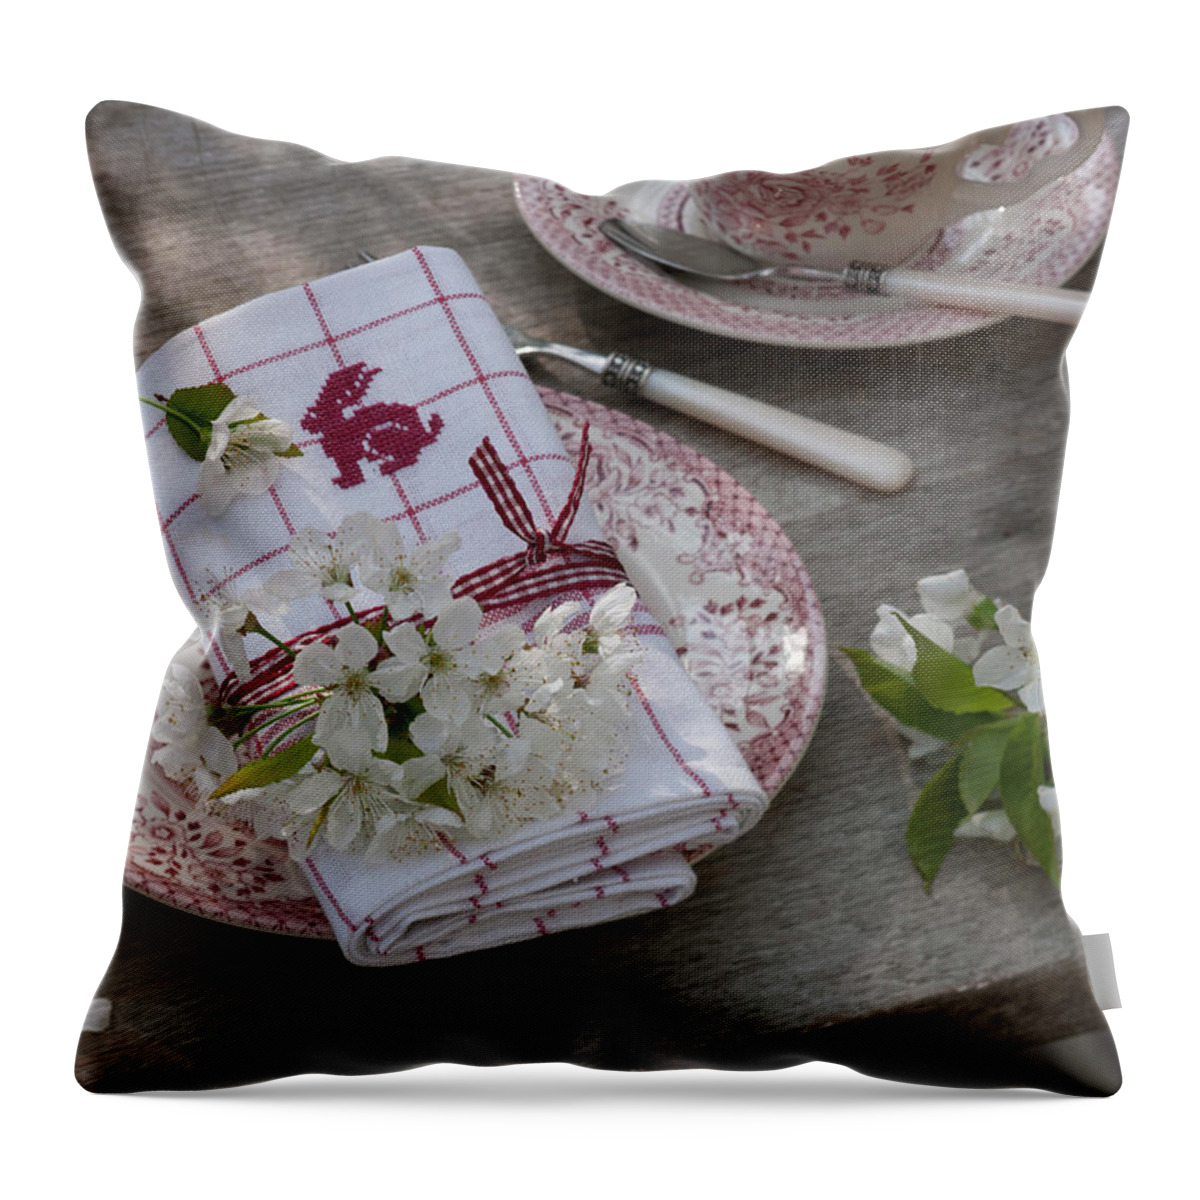 Ip_12156100 Throw Pillow featuring the photograph Hand-embroidered Tea Towel Folded As A Napkin by Friedrich Strauss